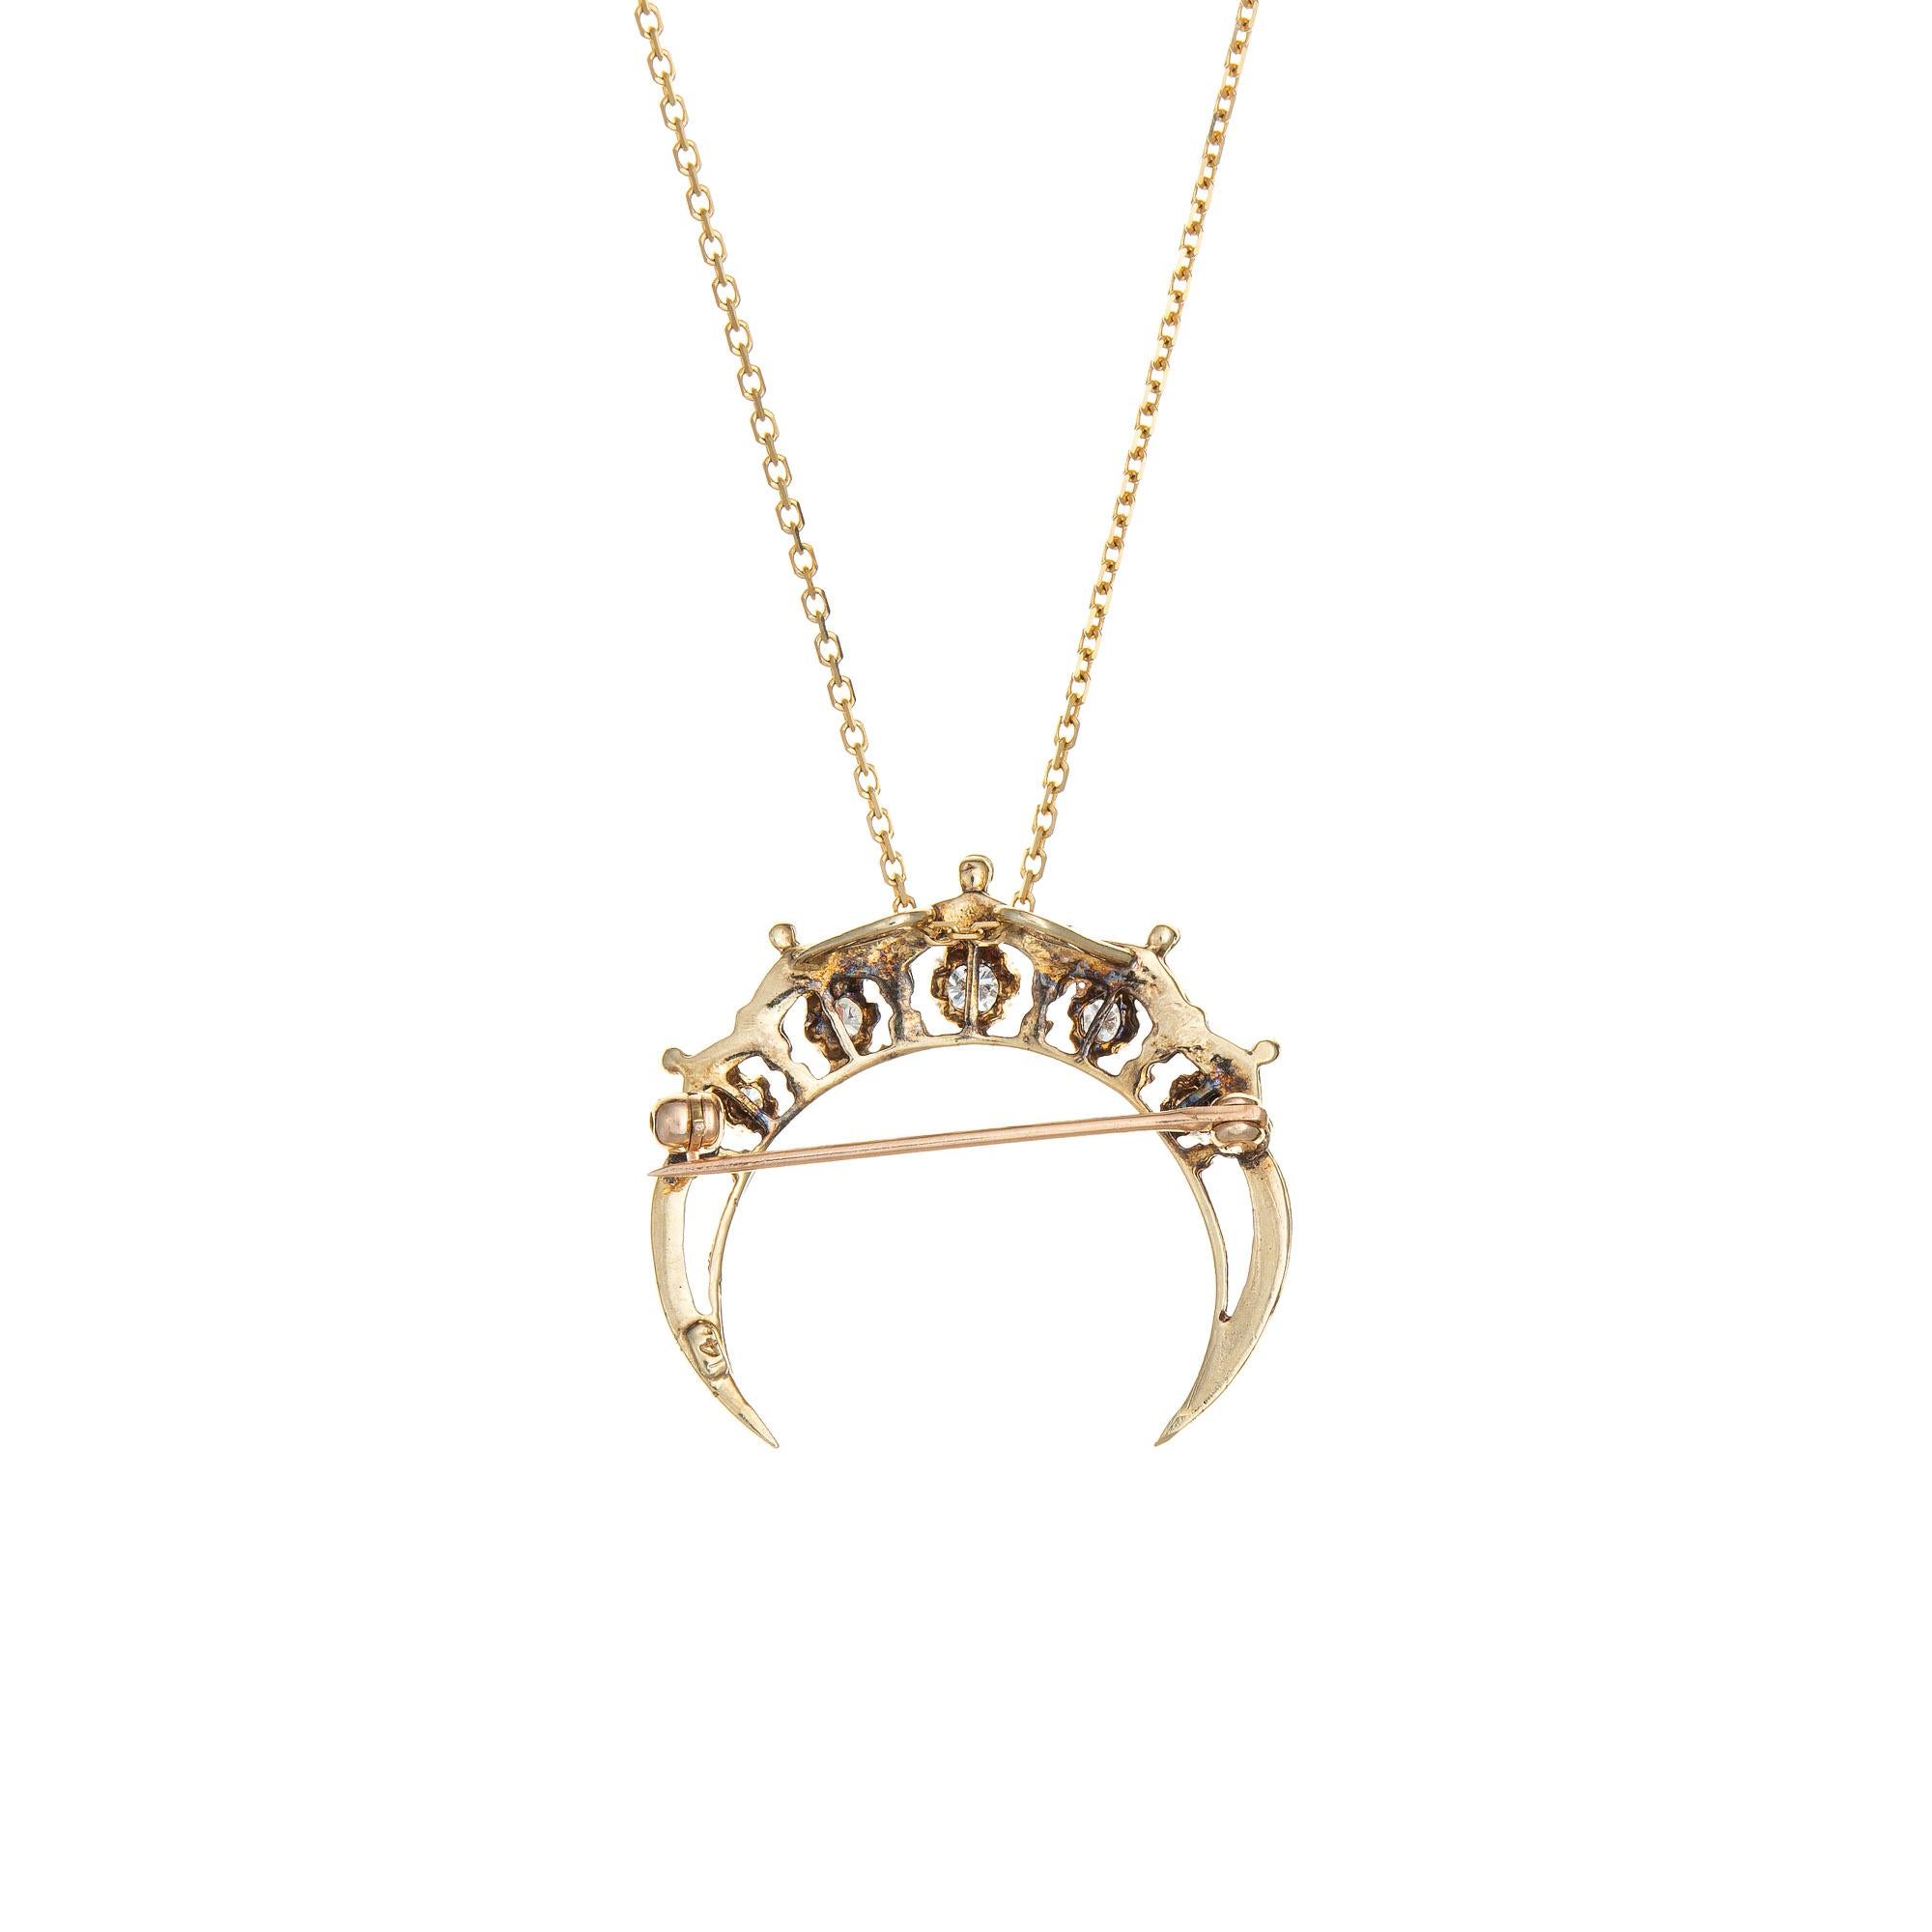 Finely detailed crescent moon diamond pendant/brooch crafted in 14k yellow gold (circa 1950s to 1960s).  

Diamonds total an estimated 0.35 carats (estimated at H-I color and VS2-SI2 clarity).

Round brilliant cut diamonds graduate in size from 0.05